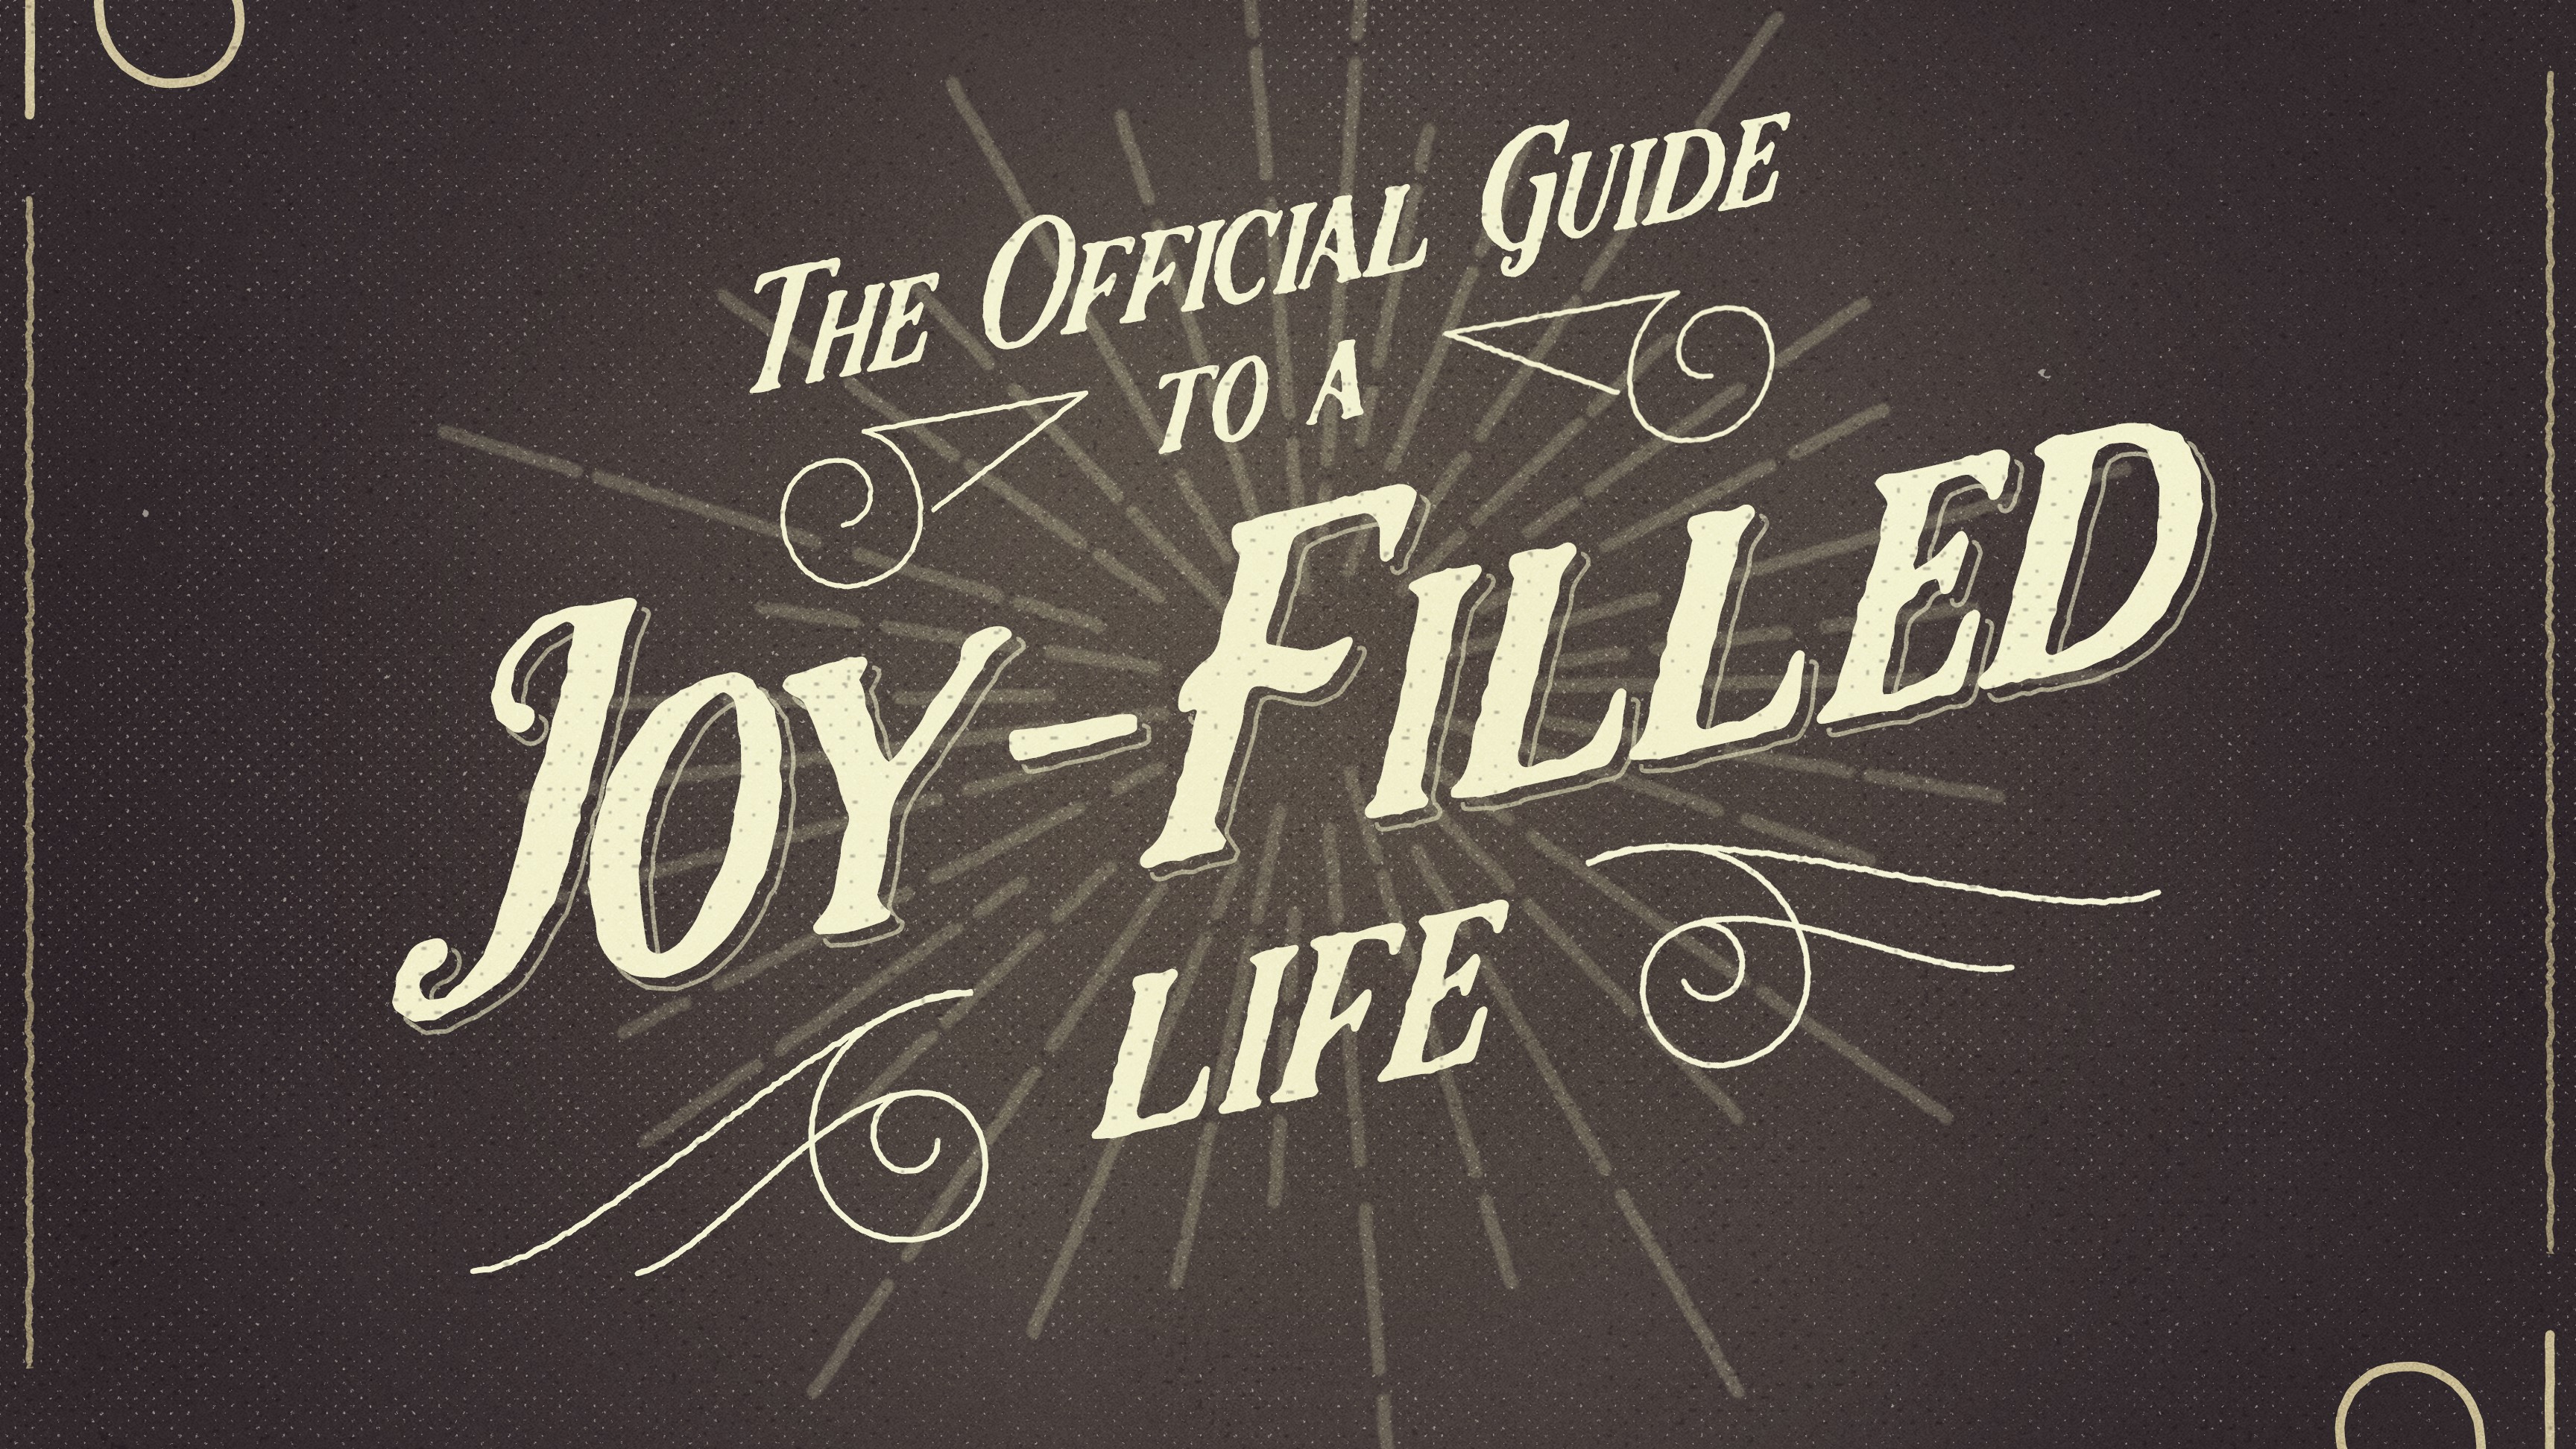 The Official Guide To A Joy-Filled Life